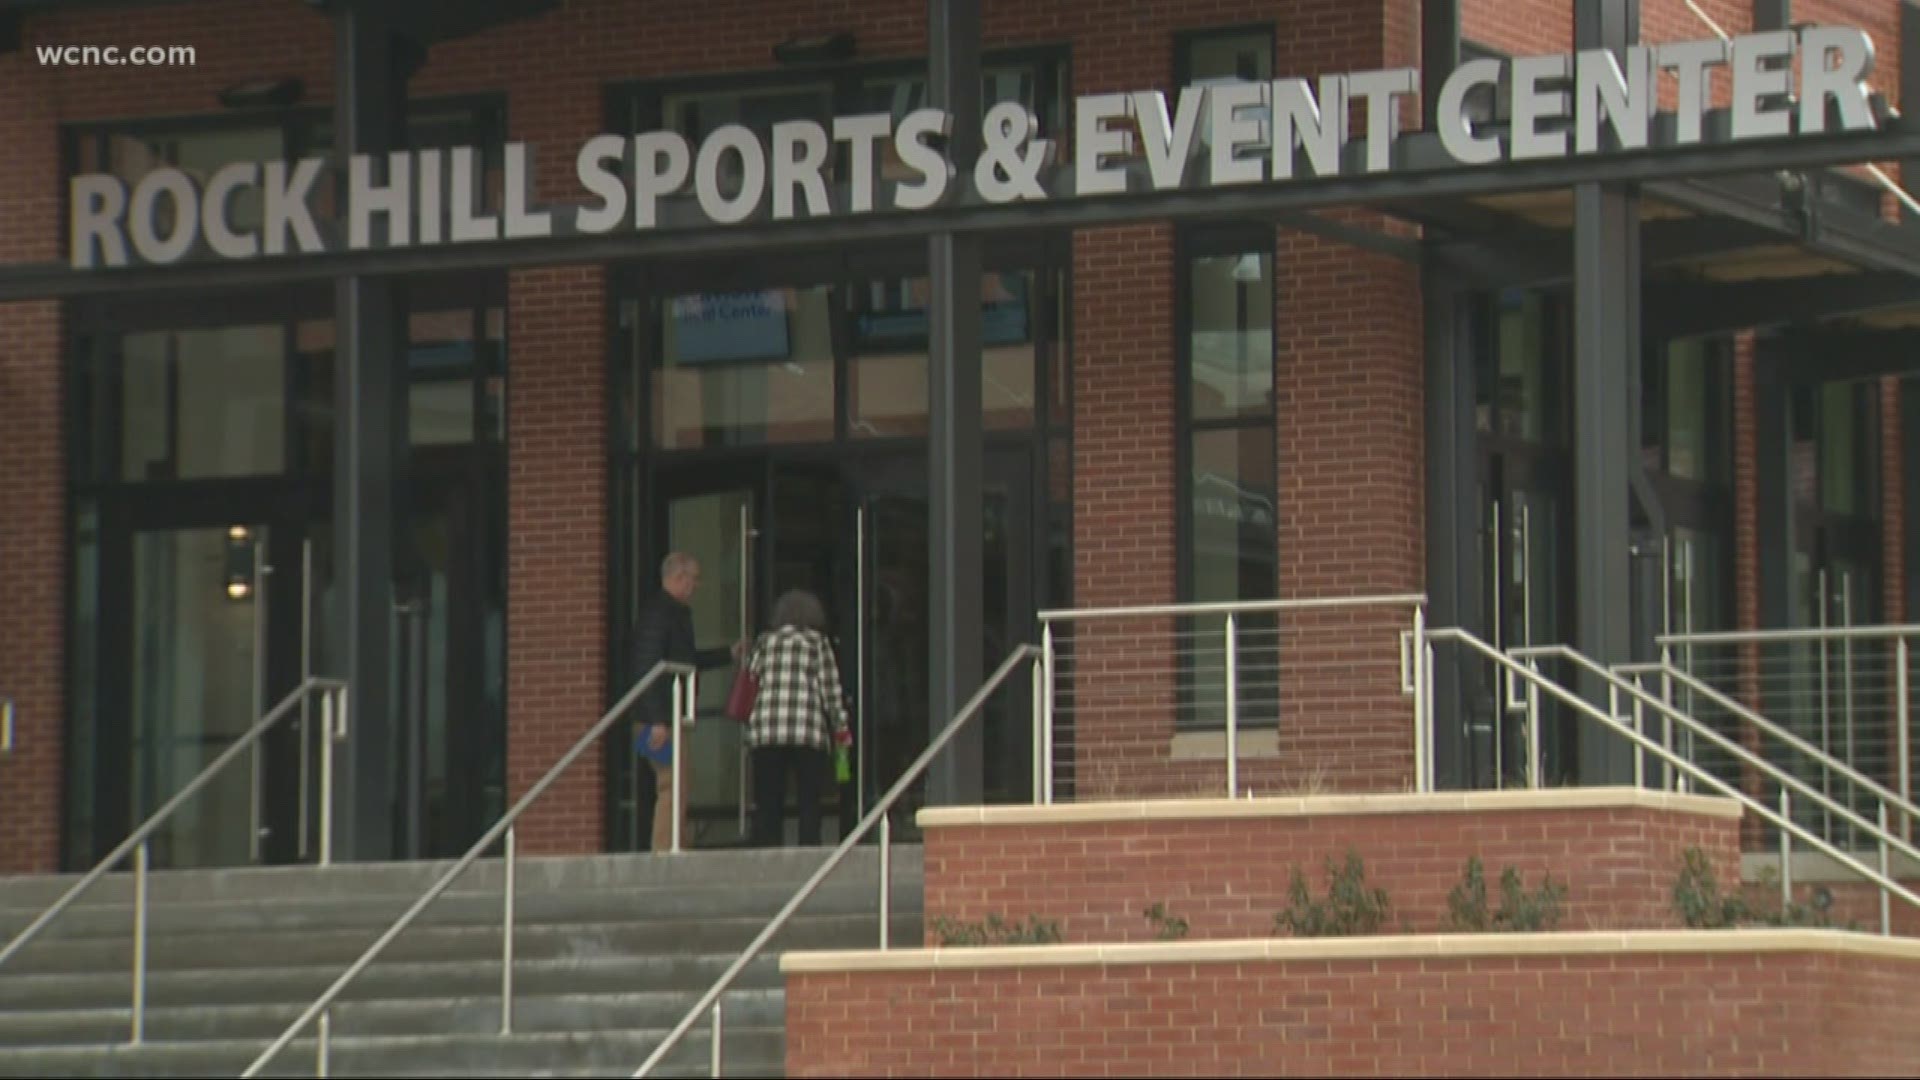 The city of Rock Hill is quickly becoming a mecca for amateur athletes. From a BMX track to the velodrome, the SC town has a number of places to host sporting events